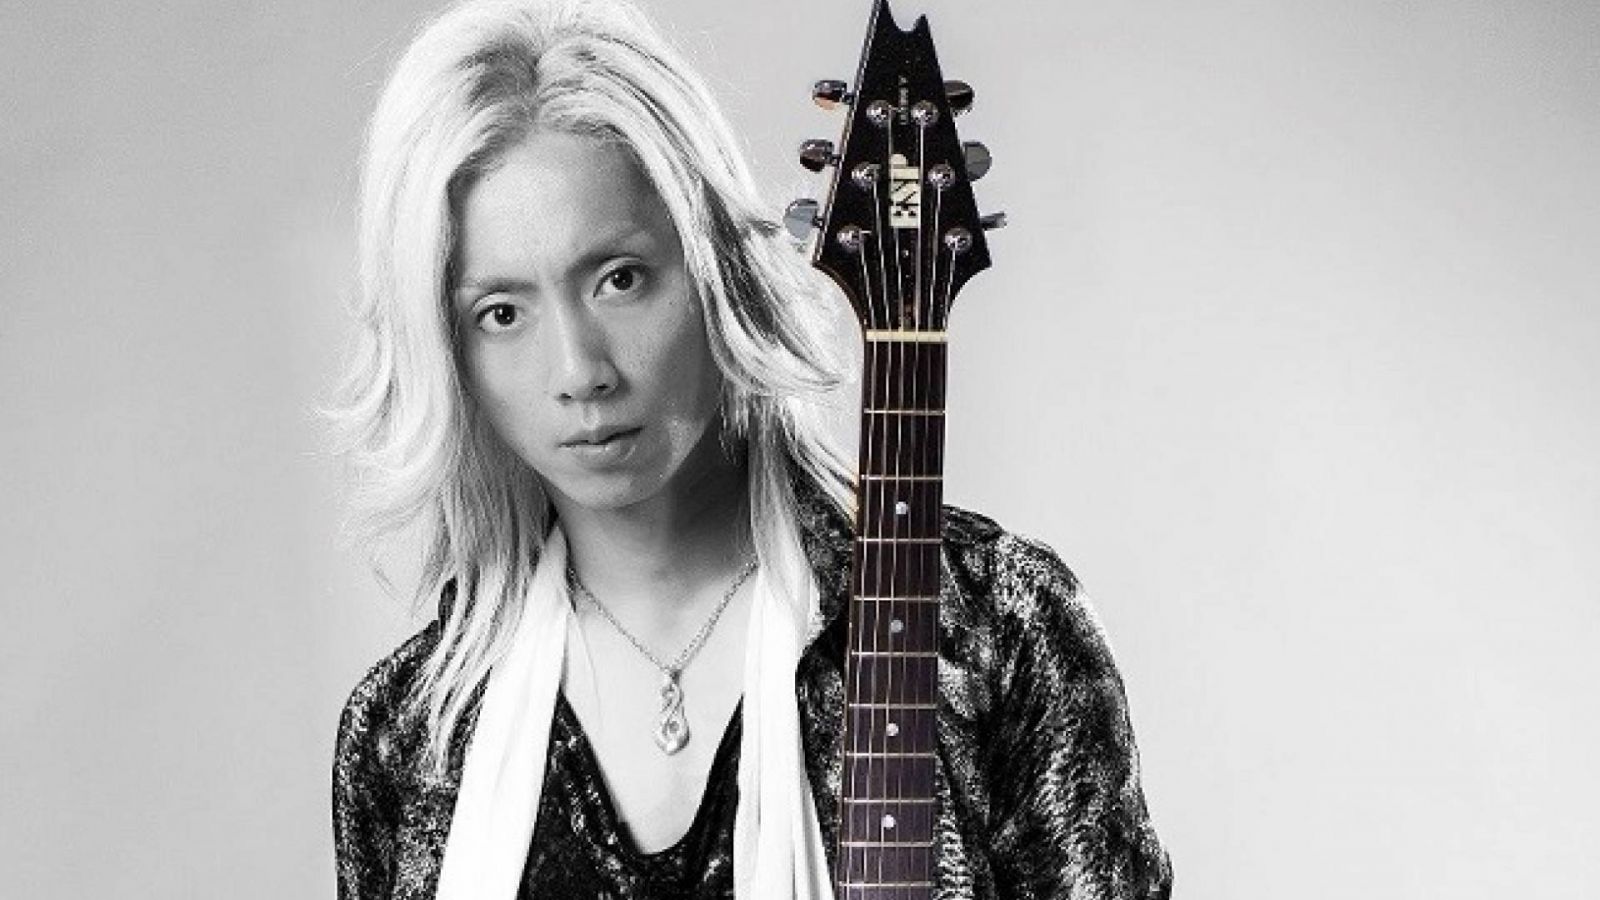 Syu to Release Instrumental Solo Album © Syu. All rights reserved.